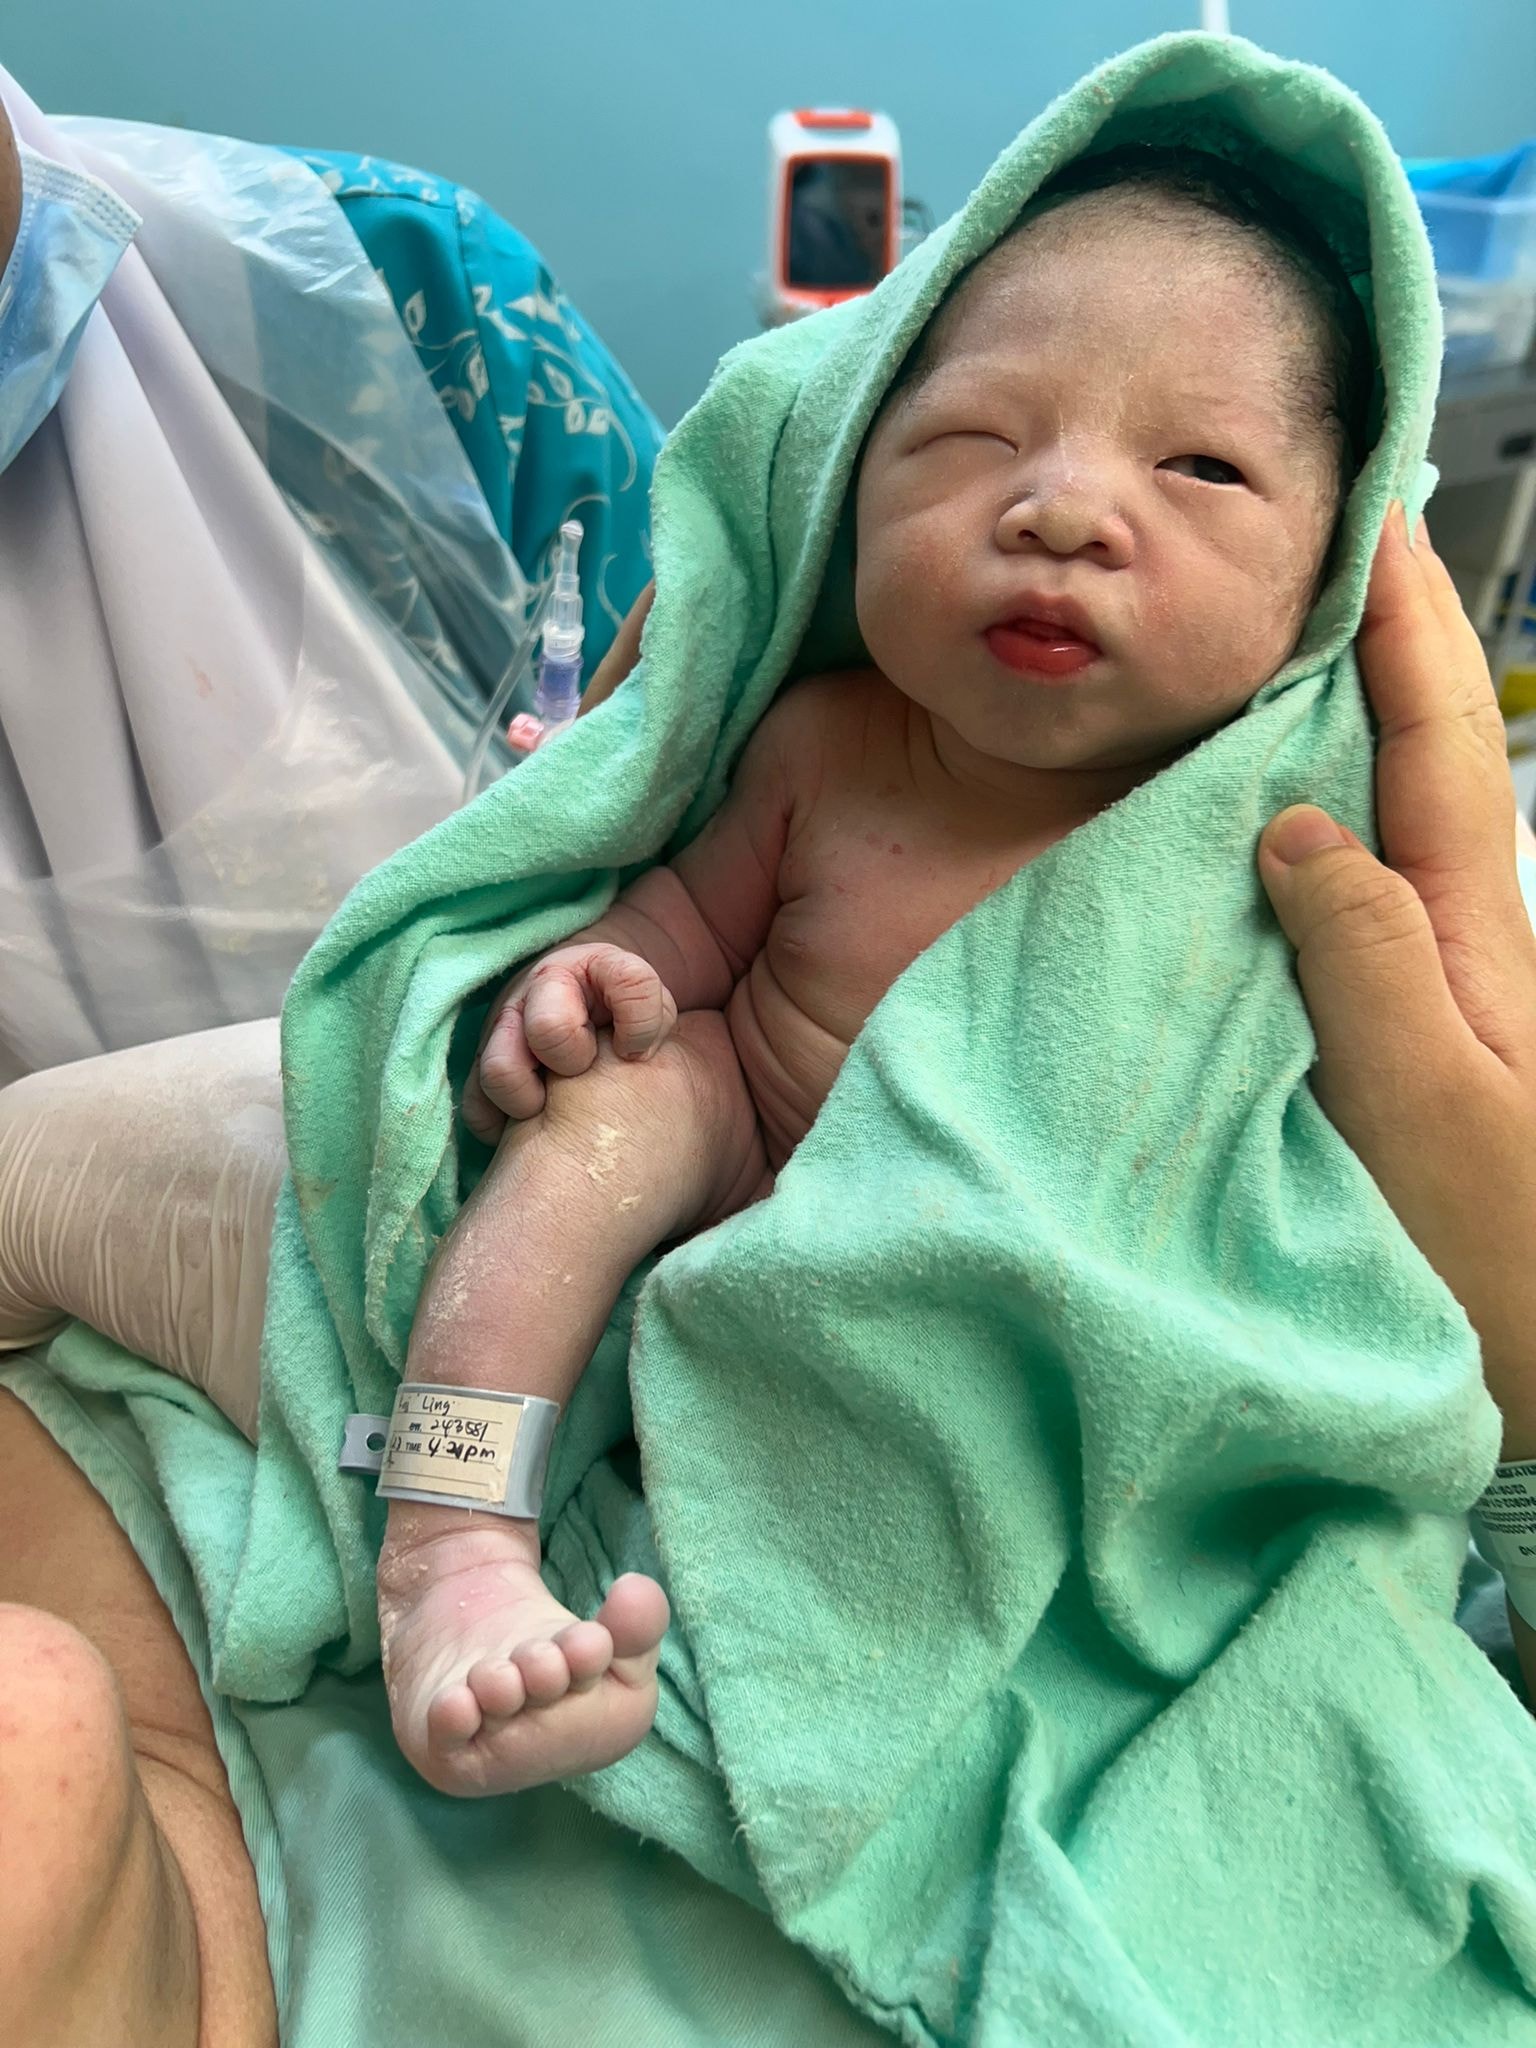 M'sian woman endures congestion at woodlands checkpoint to give birth in johor bahru after her water breaks  | weirdkaya